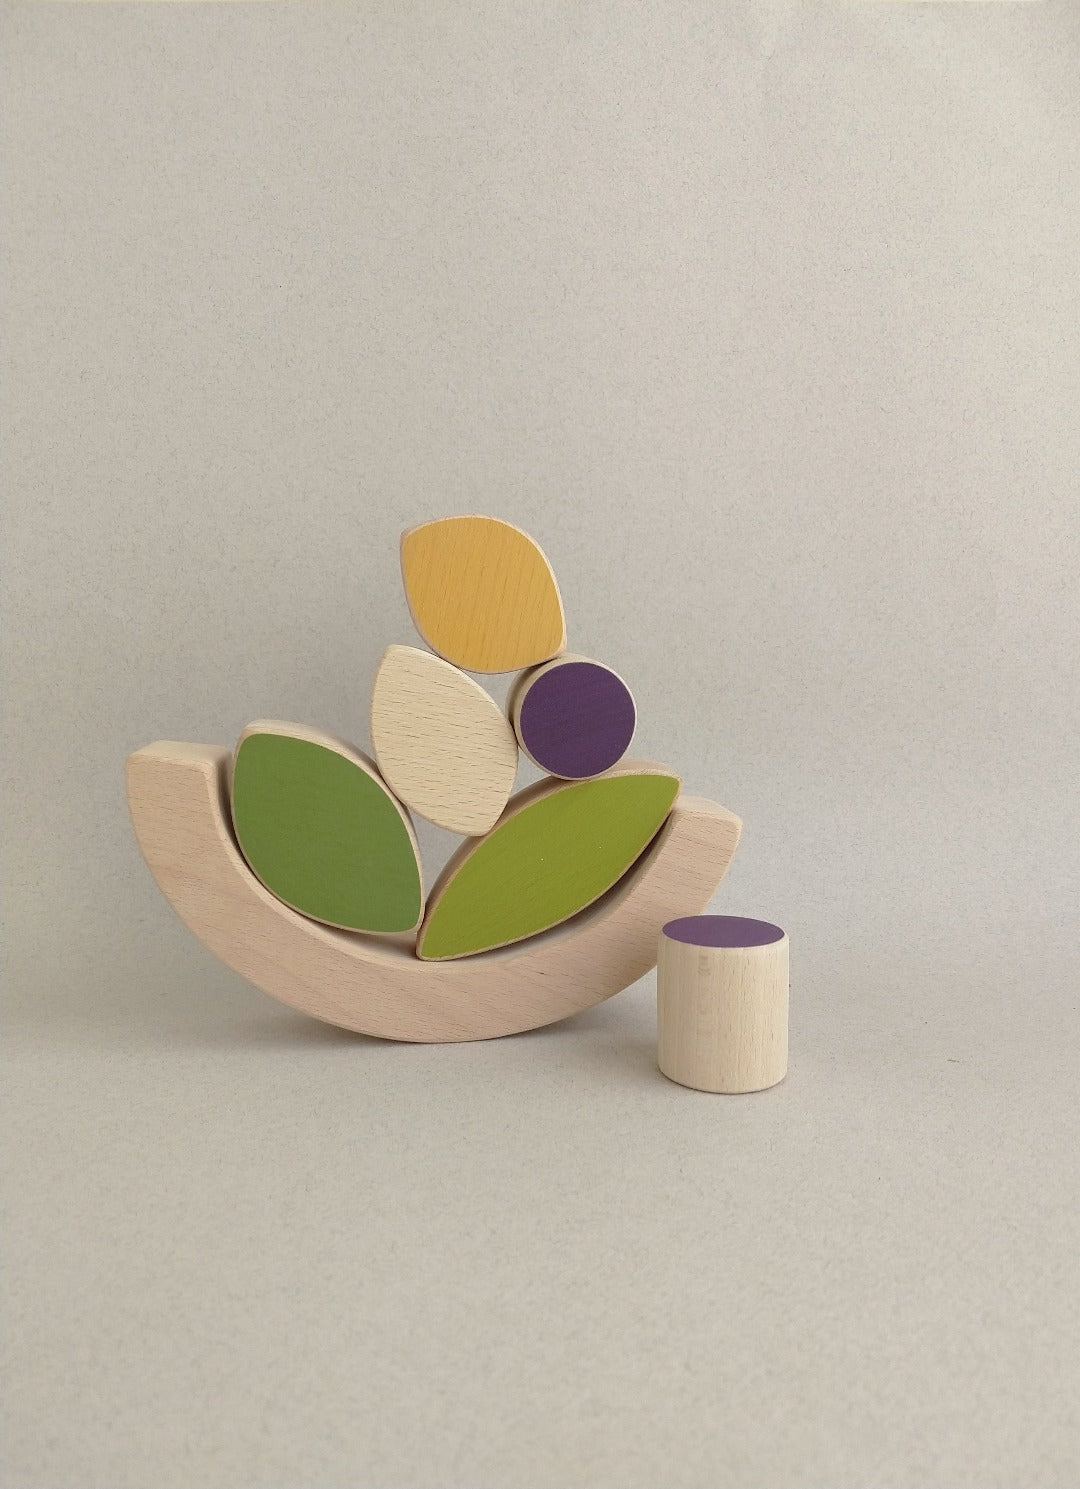 A wooden stacking toy hand-cut, hand-painted and sanded satin smooth.